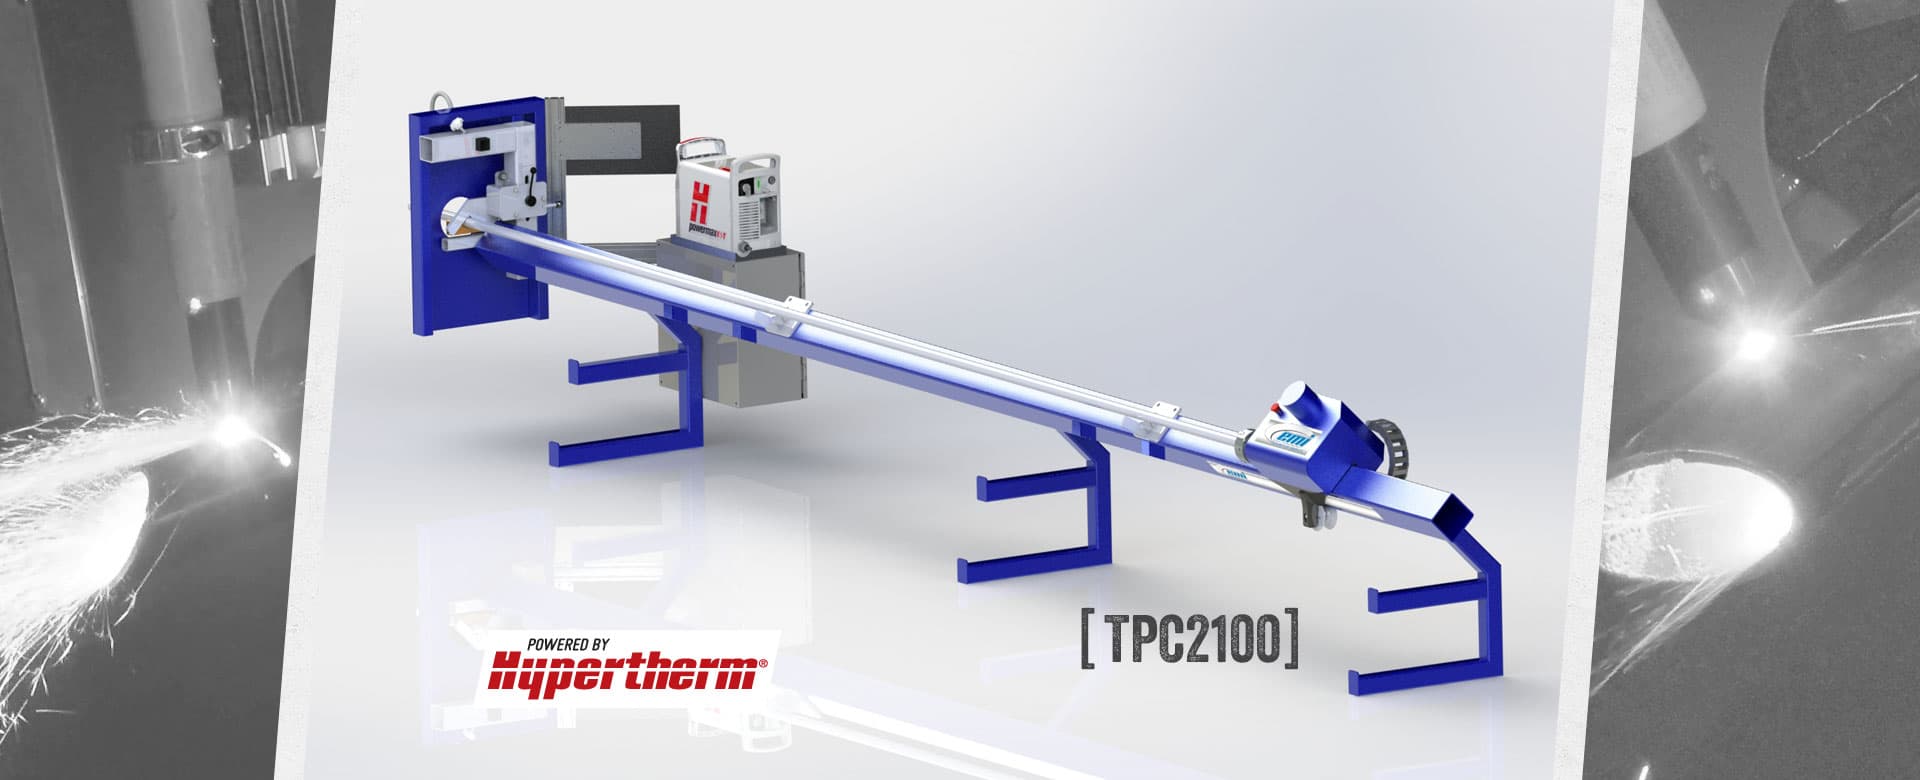 GSS Machinery offers the EMI TPC 2100 with optional auto loading capability.